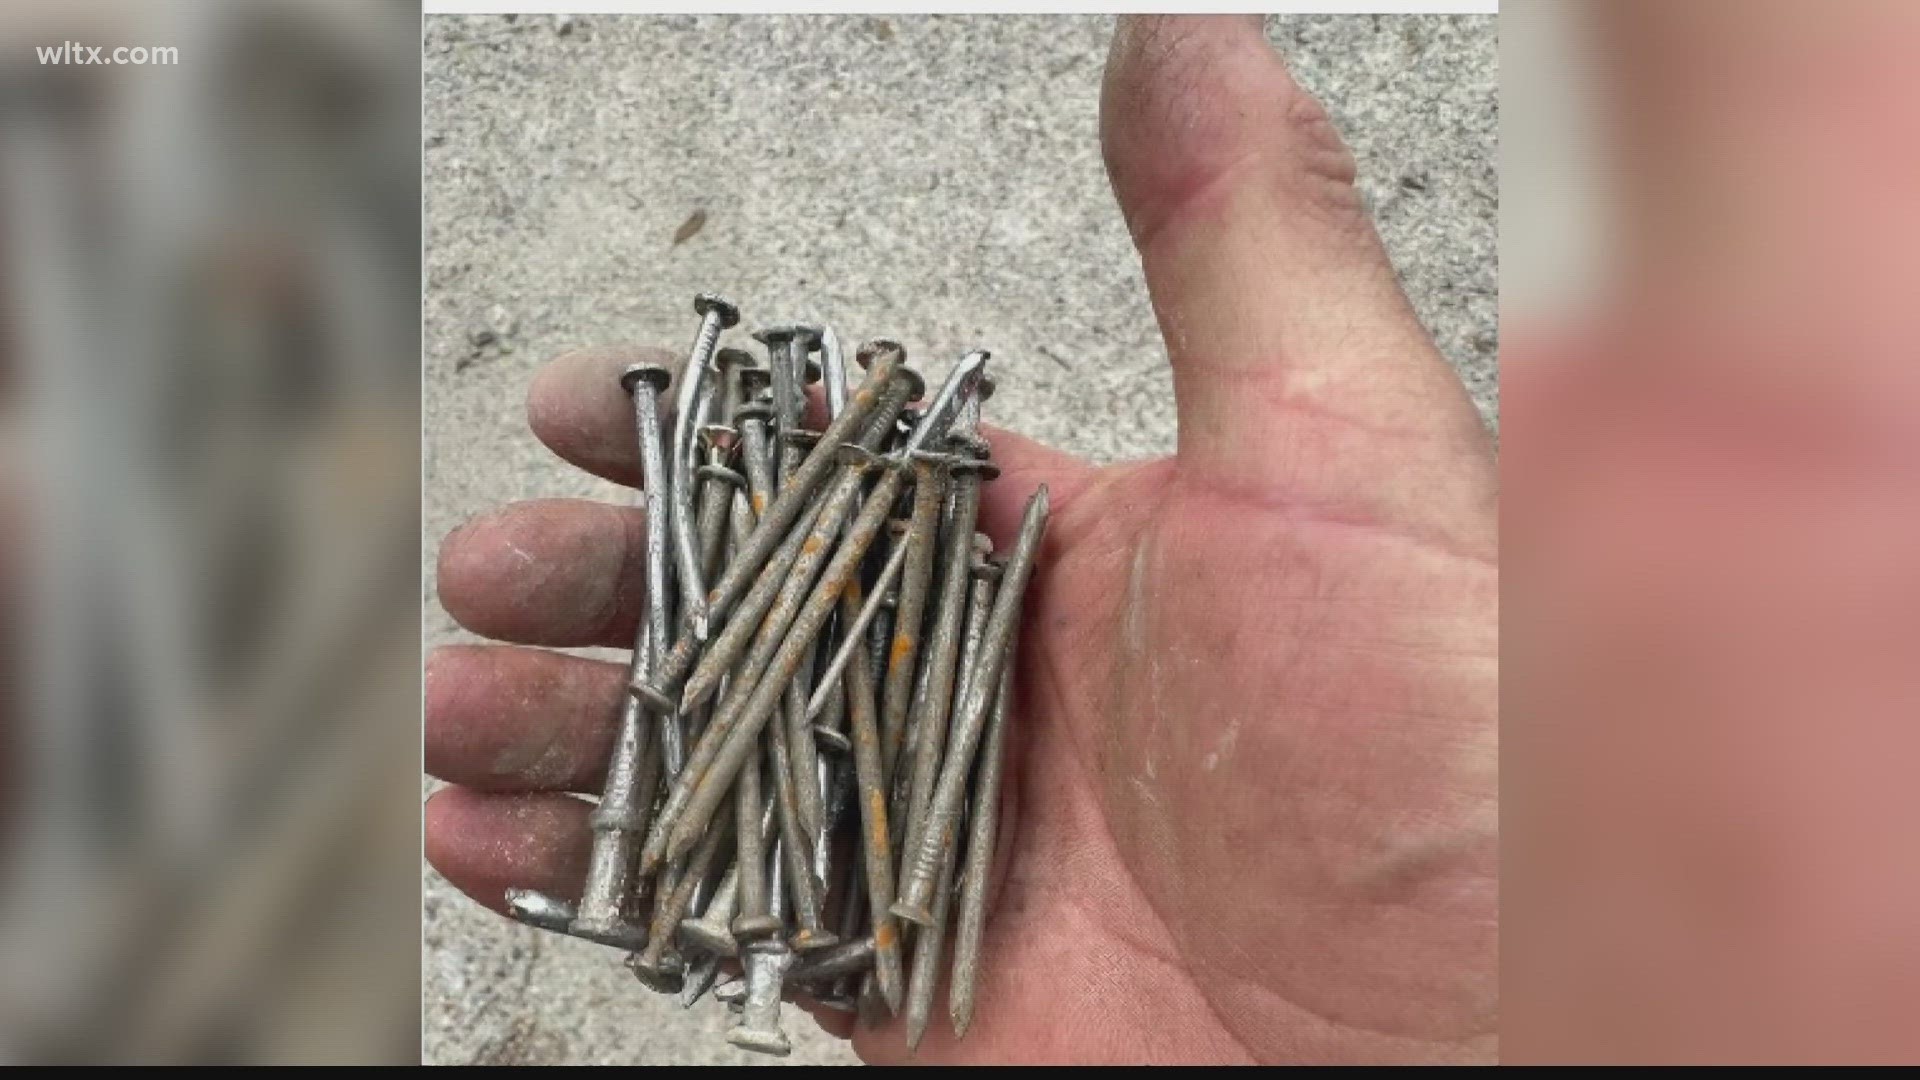 A sidewalk work along the Leesburg Road widening project, led to nails being left in the road.